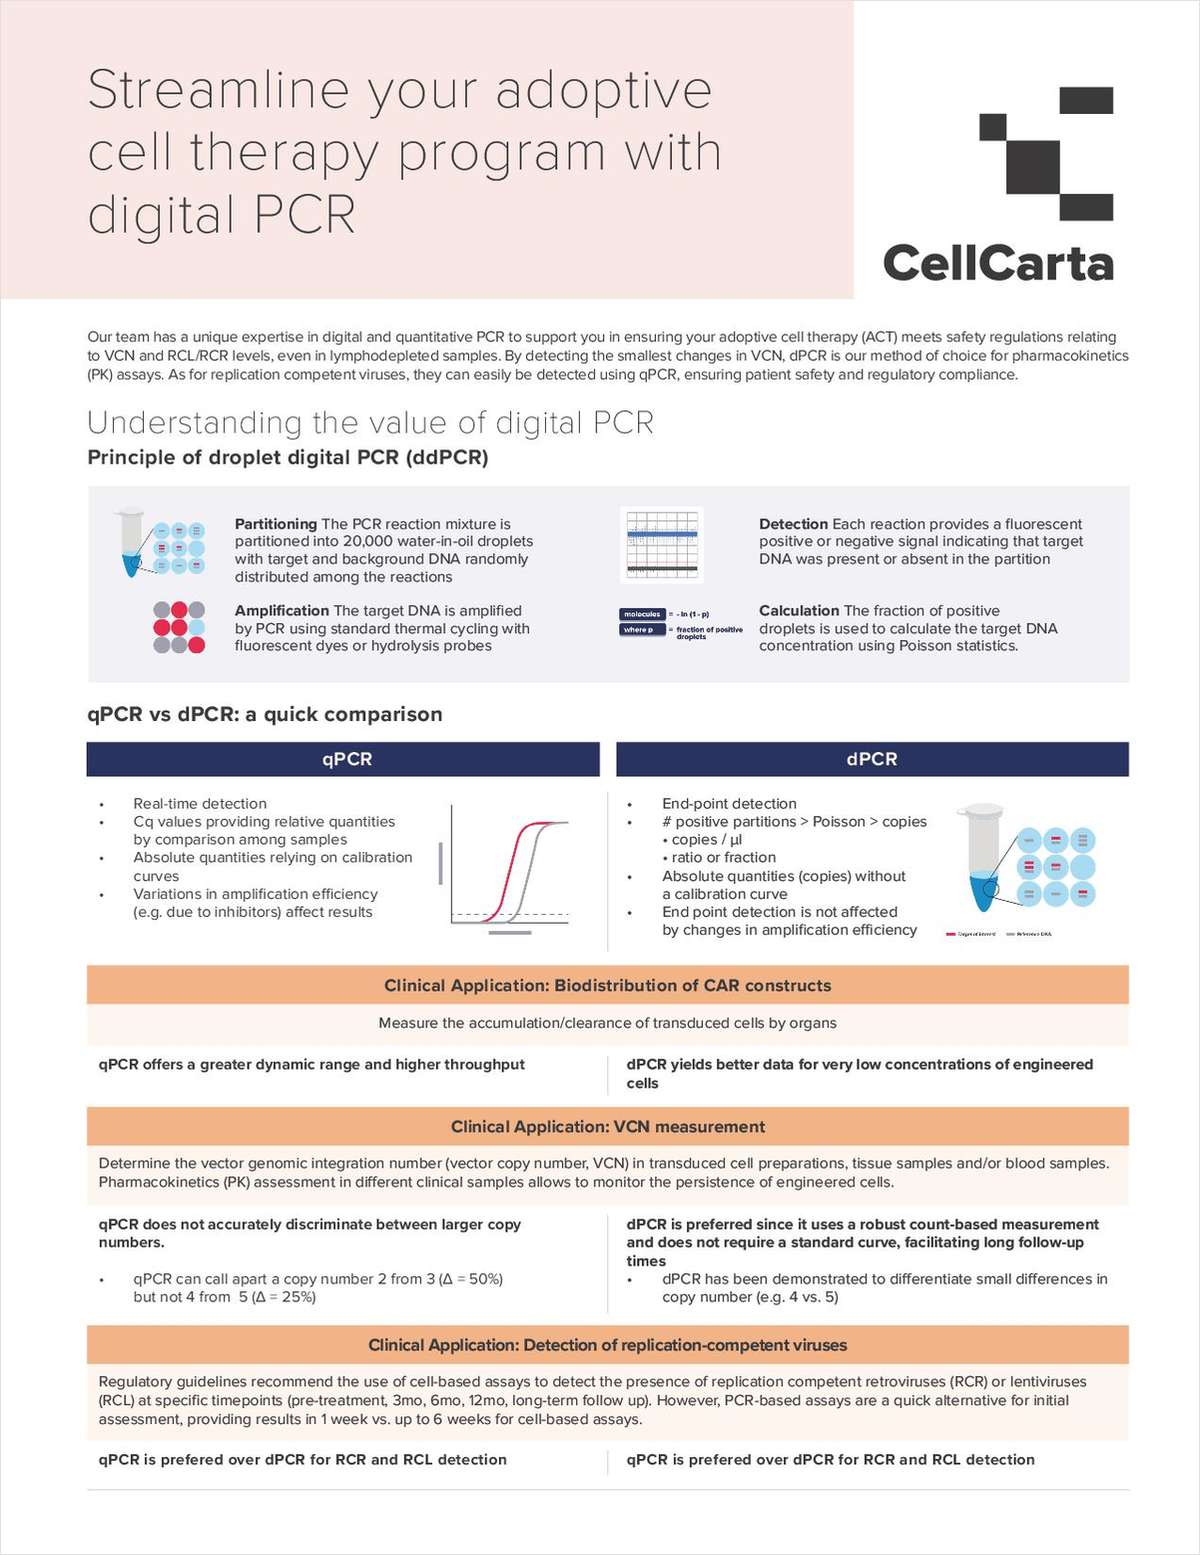 Streamline Your Adoptive Cell Therapy Program with Digital PCR